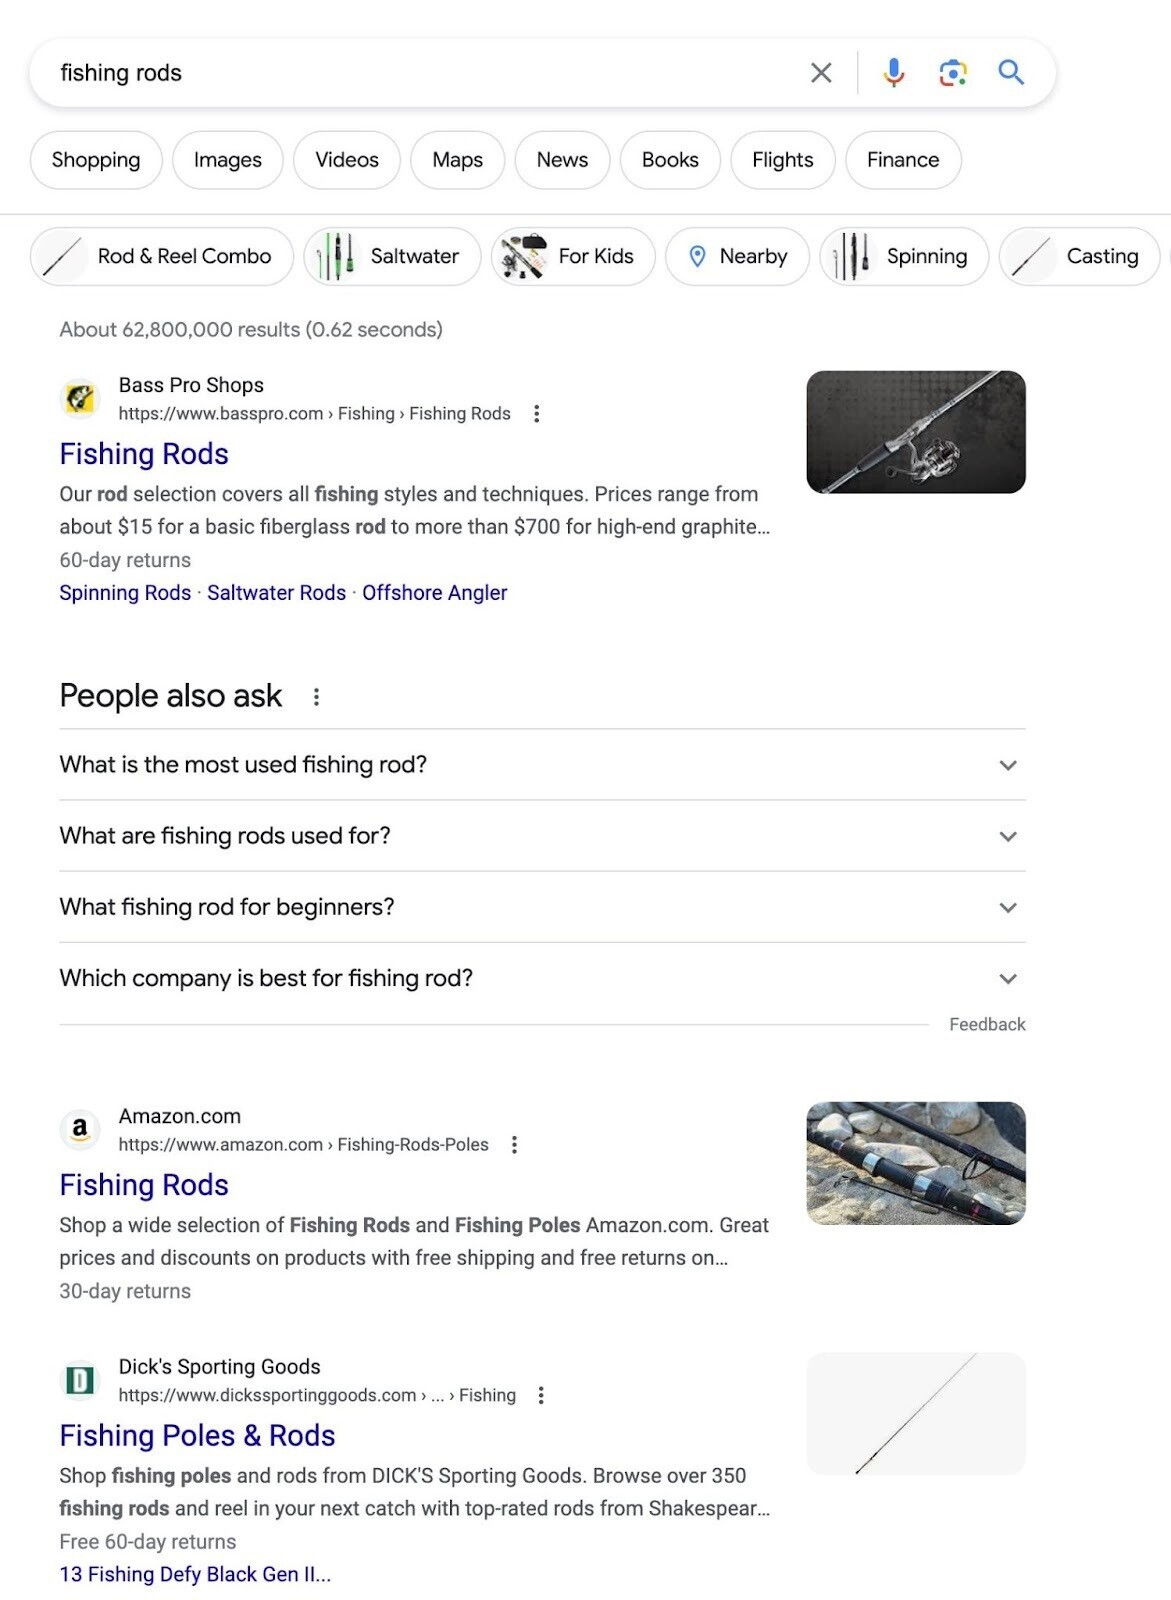 Google SERP for "fishing rods"